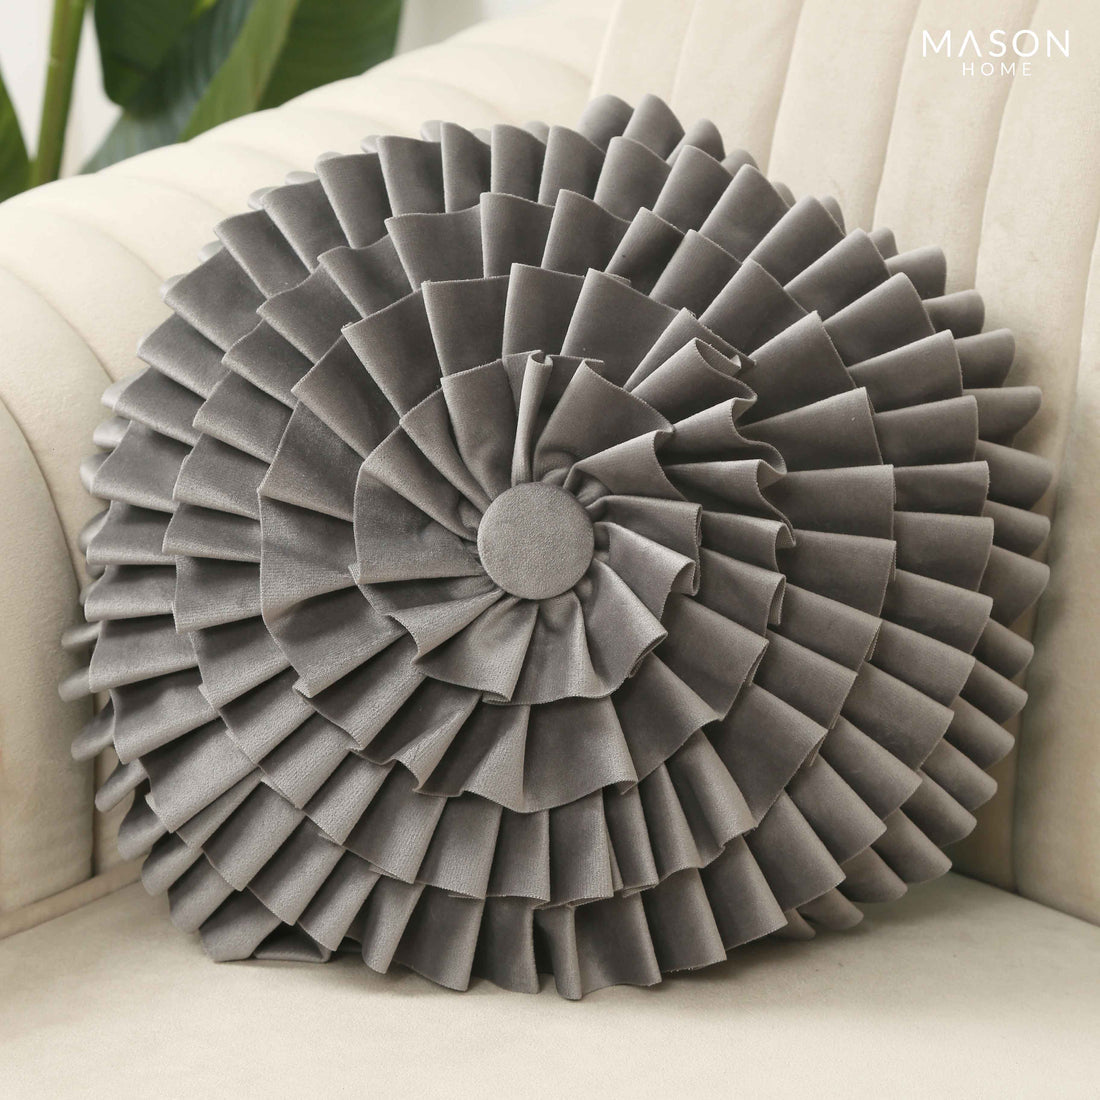 Floret Grey Round Cover With Filler